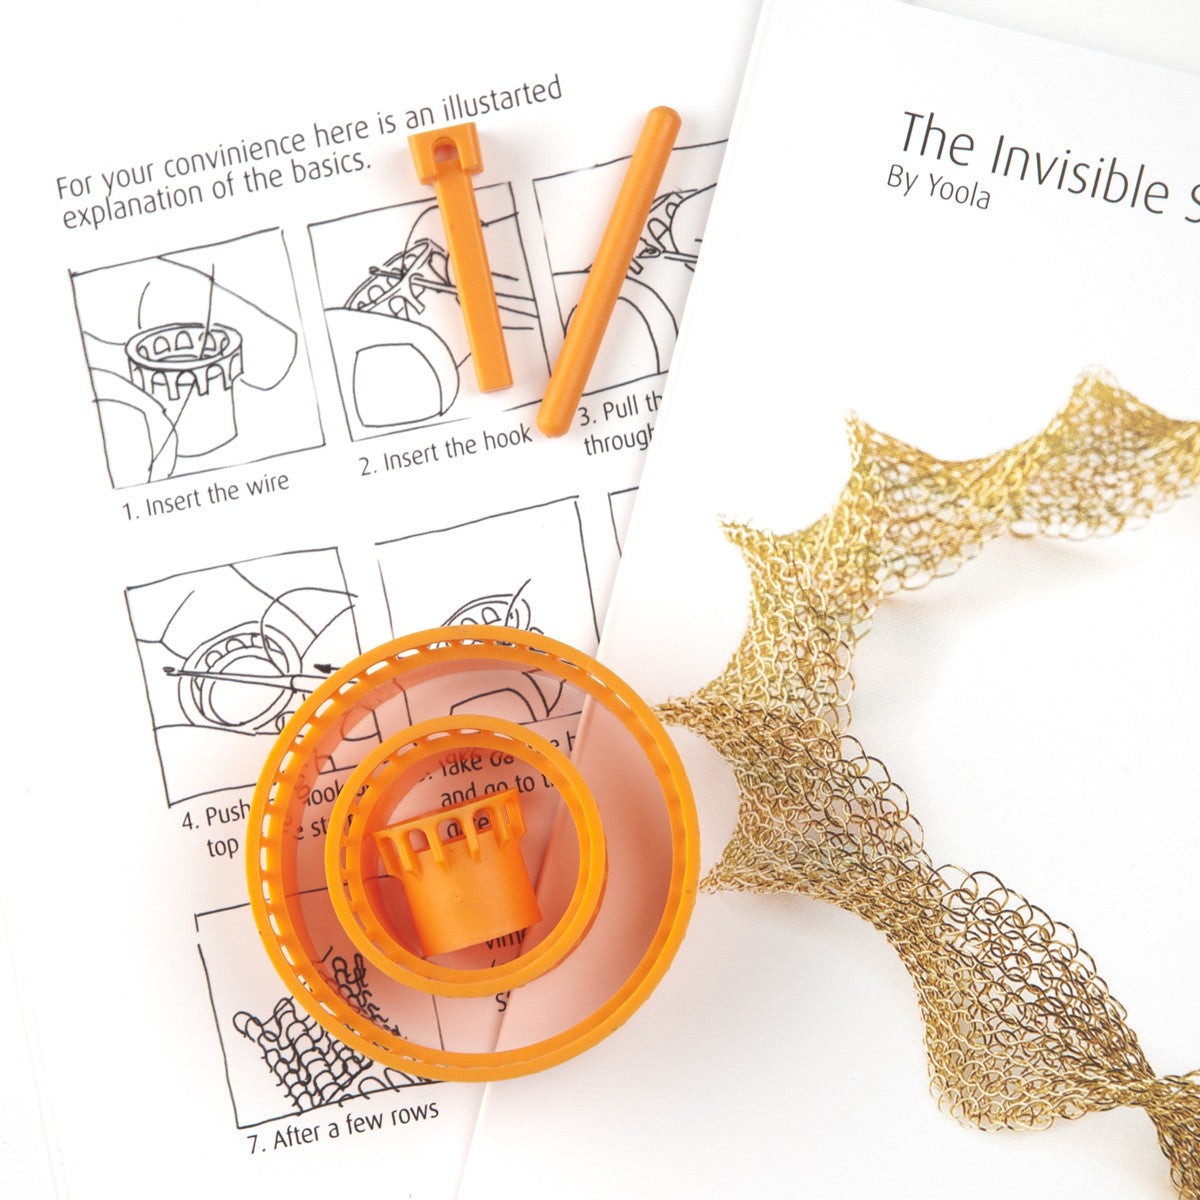 Wire crochet kit extended DIY beginners kit by Yooladesign.